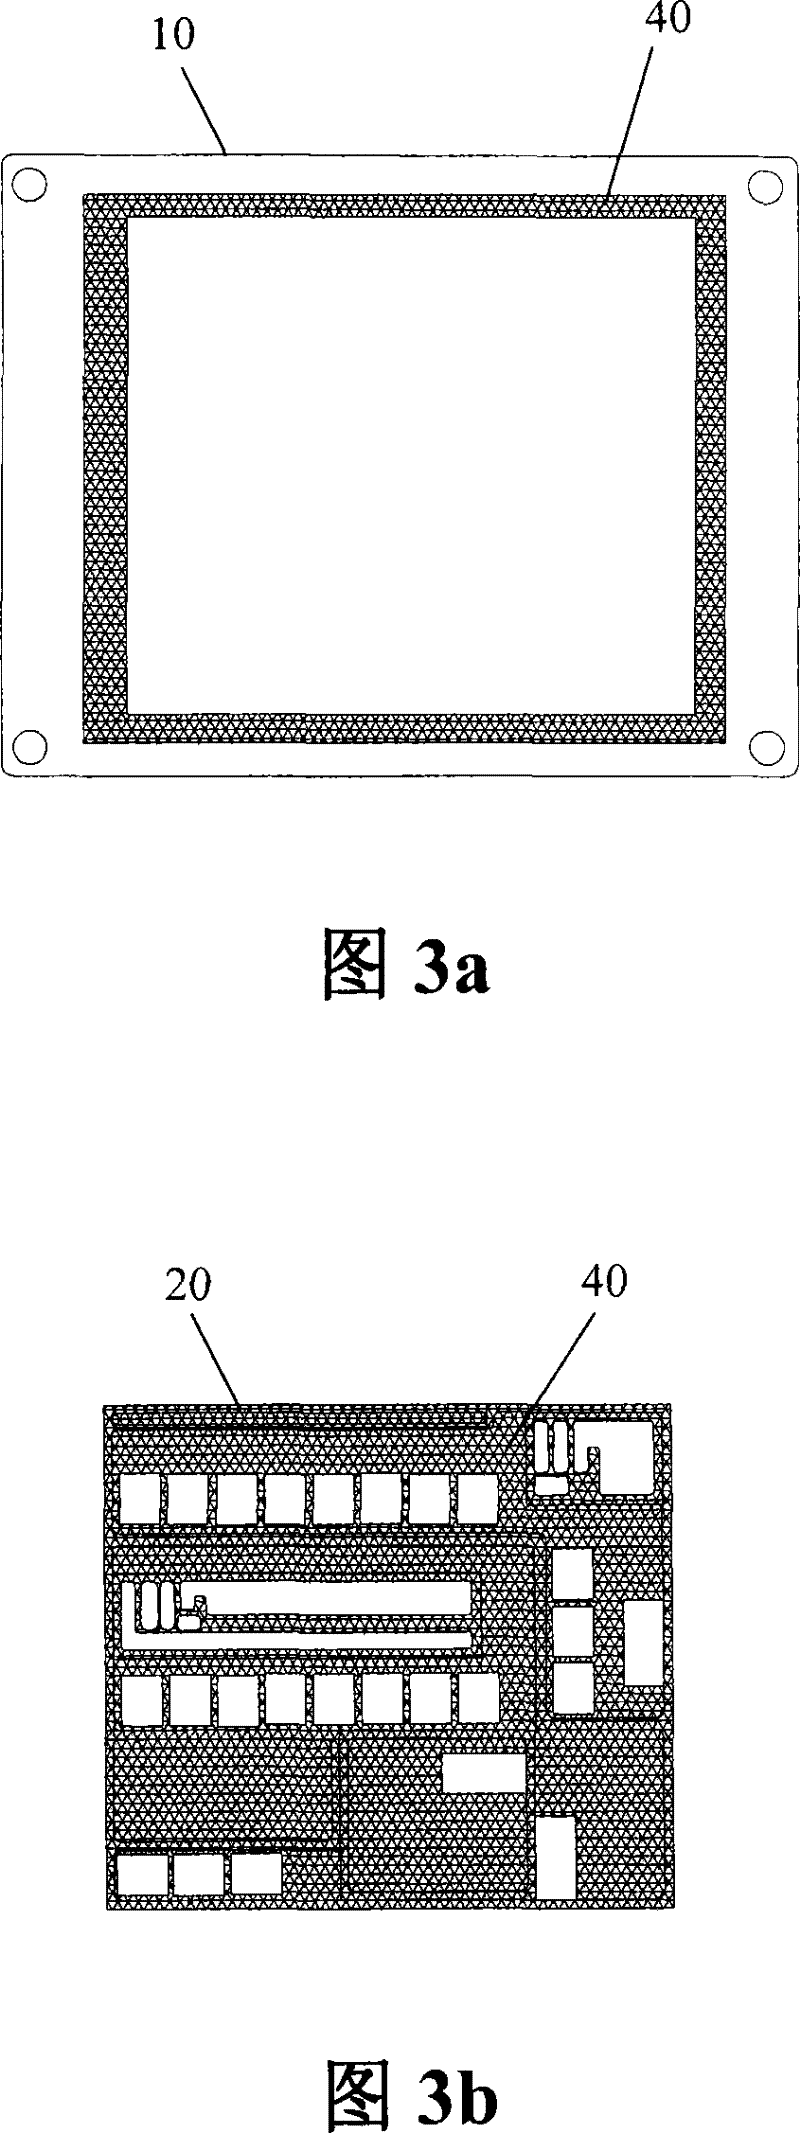 Three-layer stereo power encapsulation method and structure